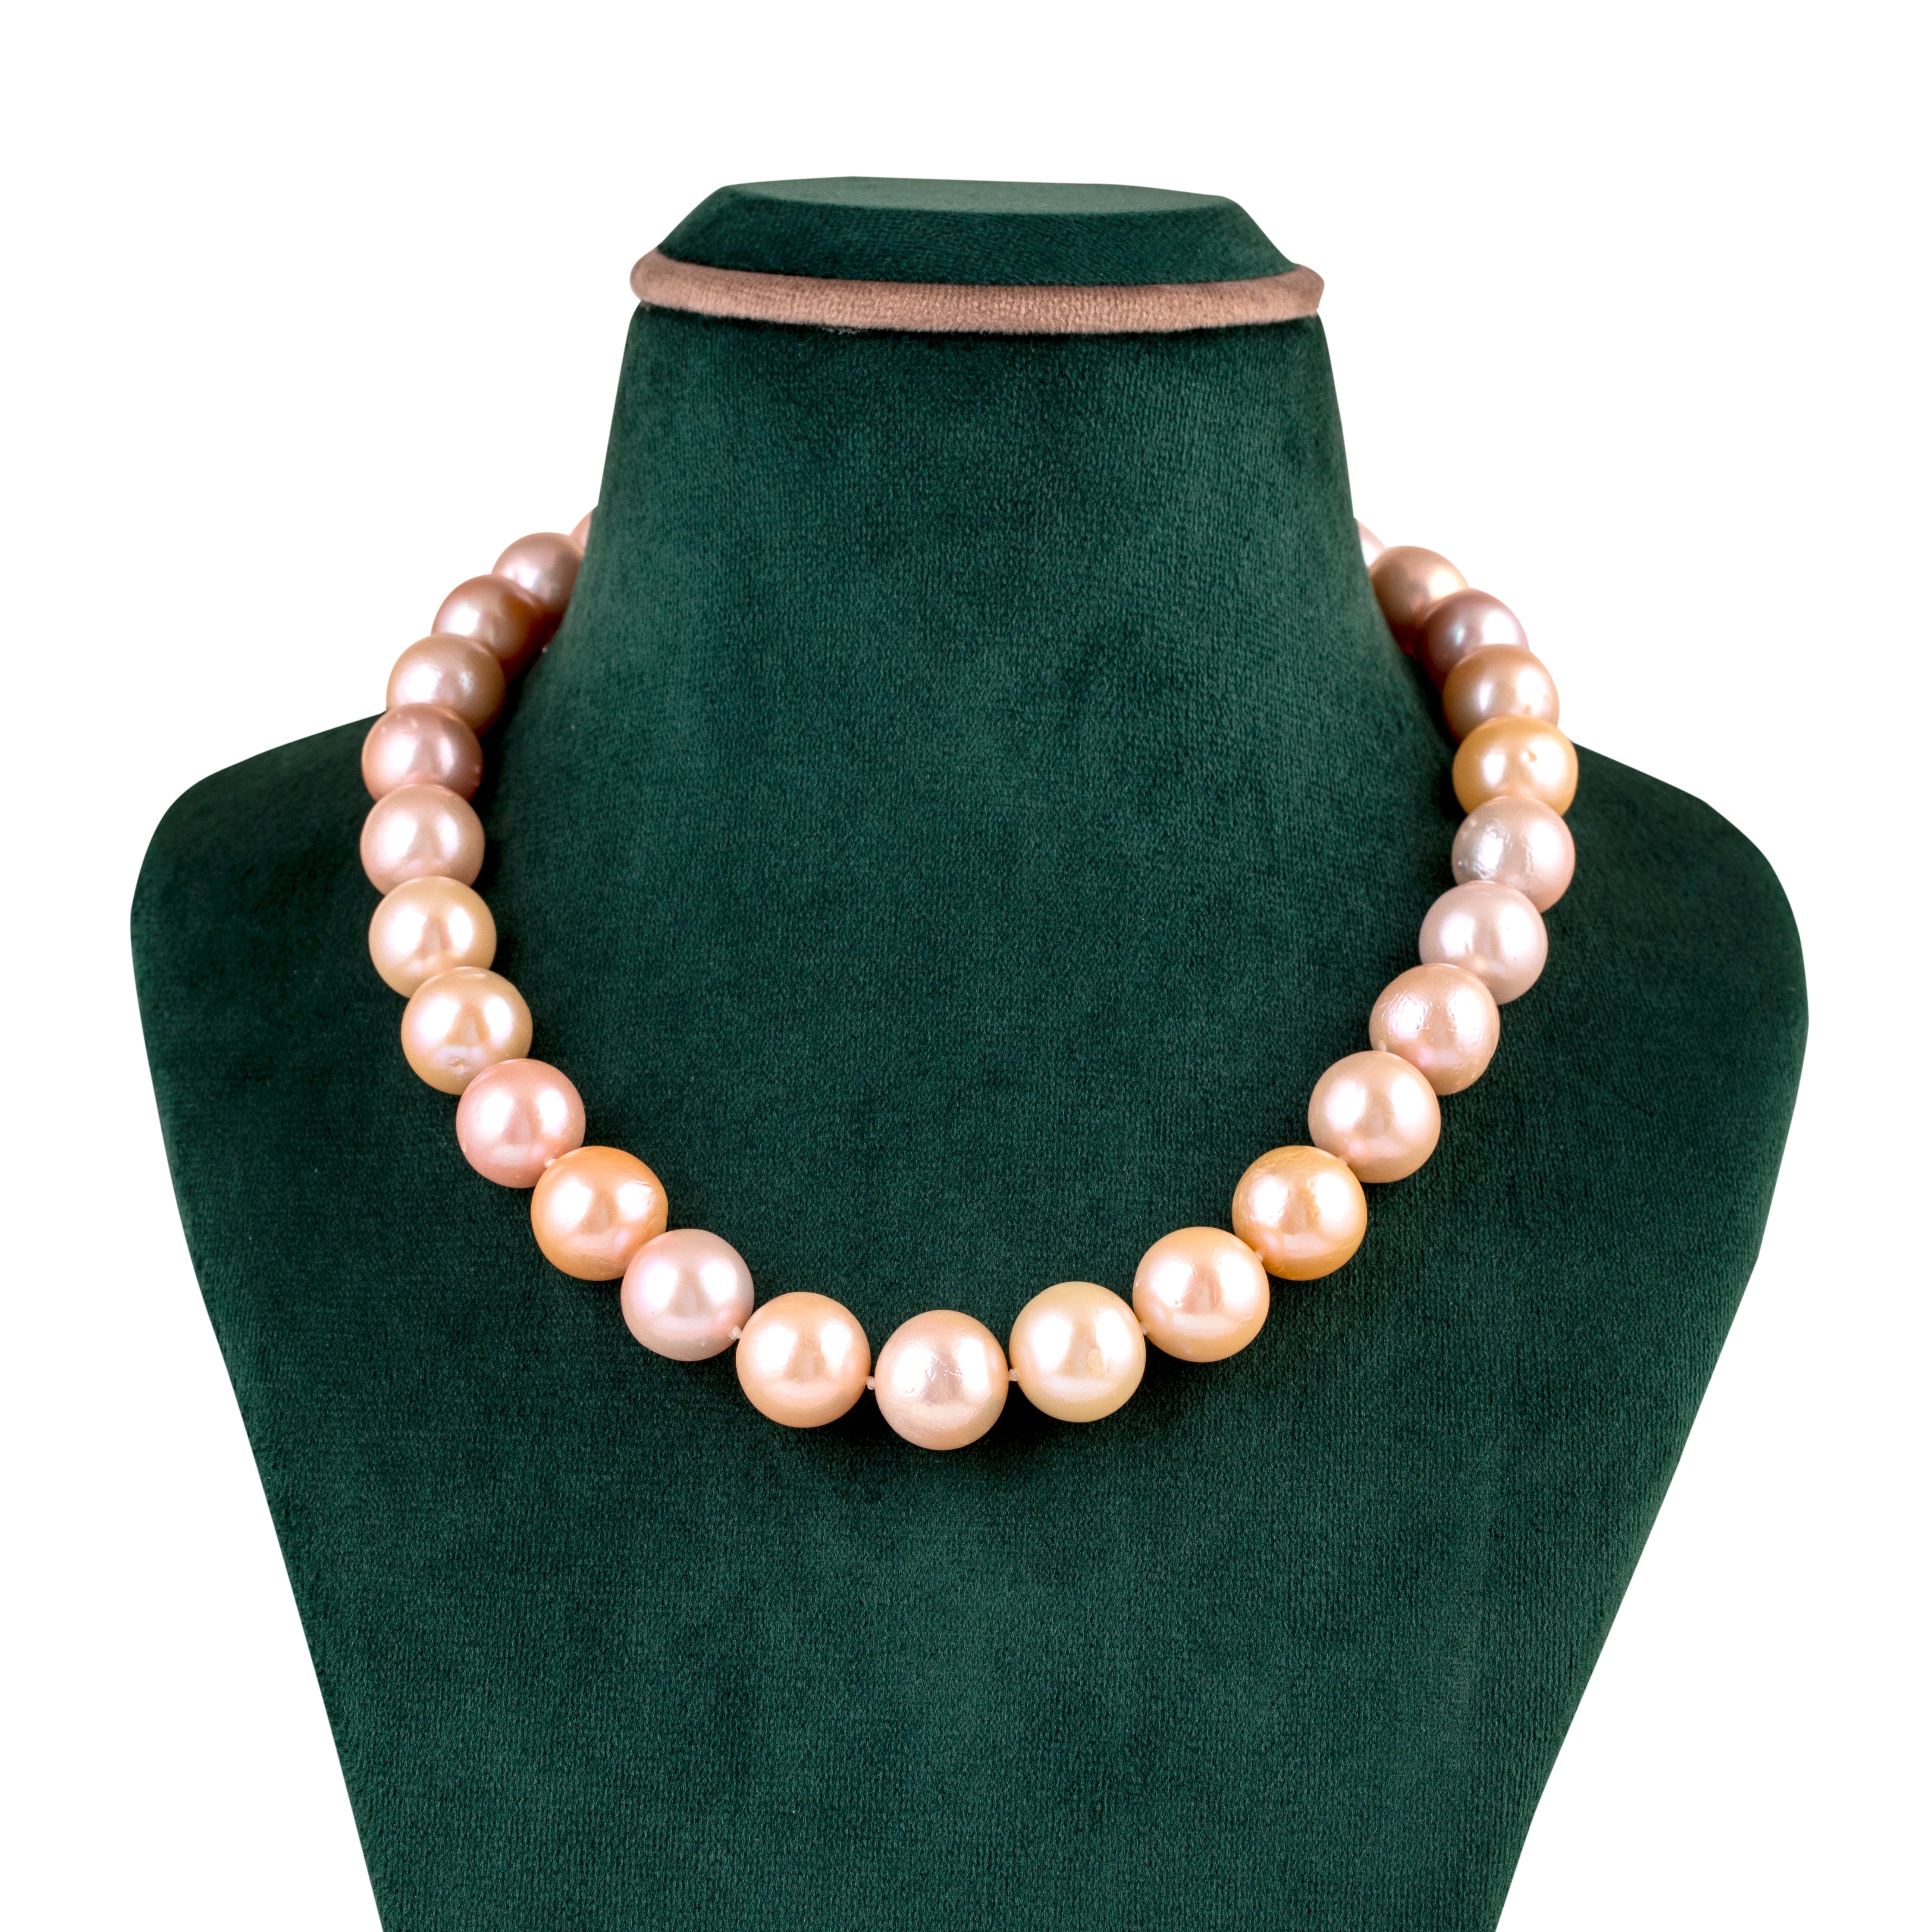 Peach Bridal Roseate Freshwater Pearl Necklace